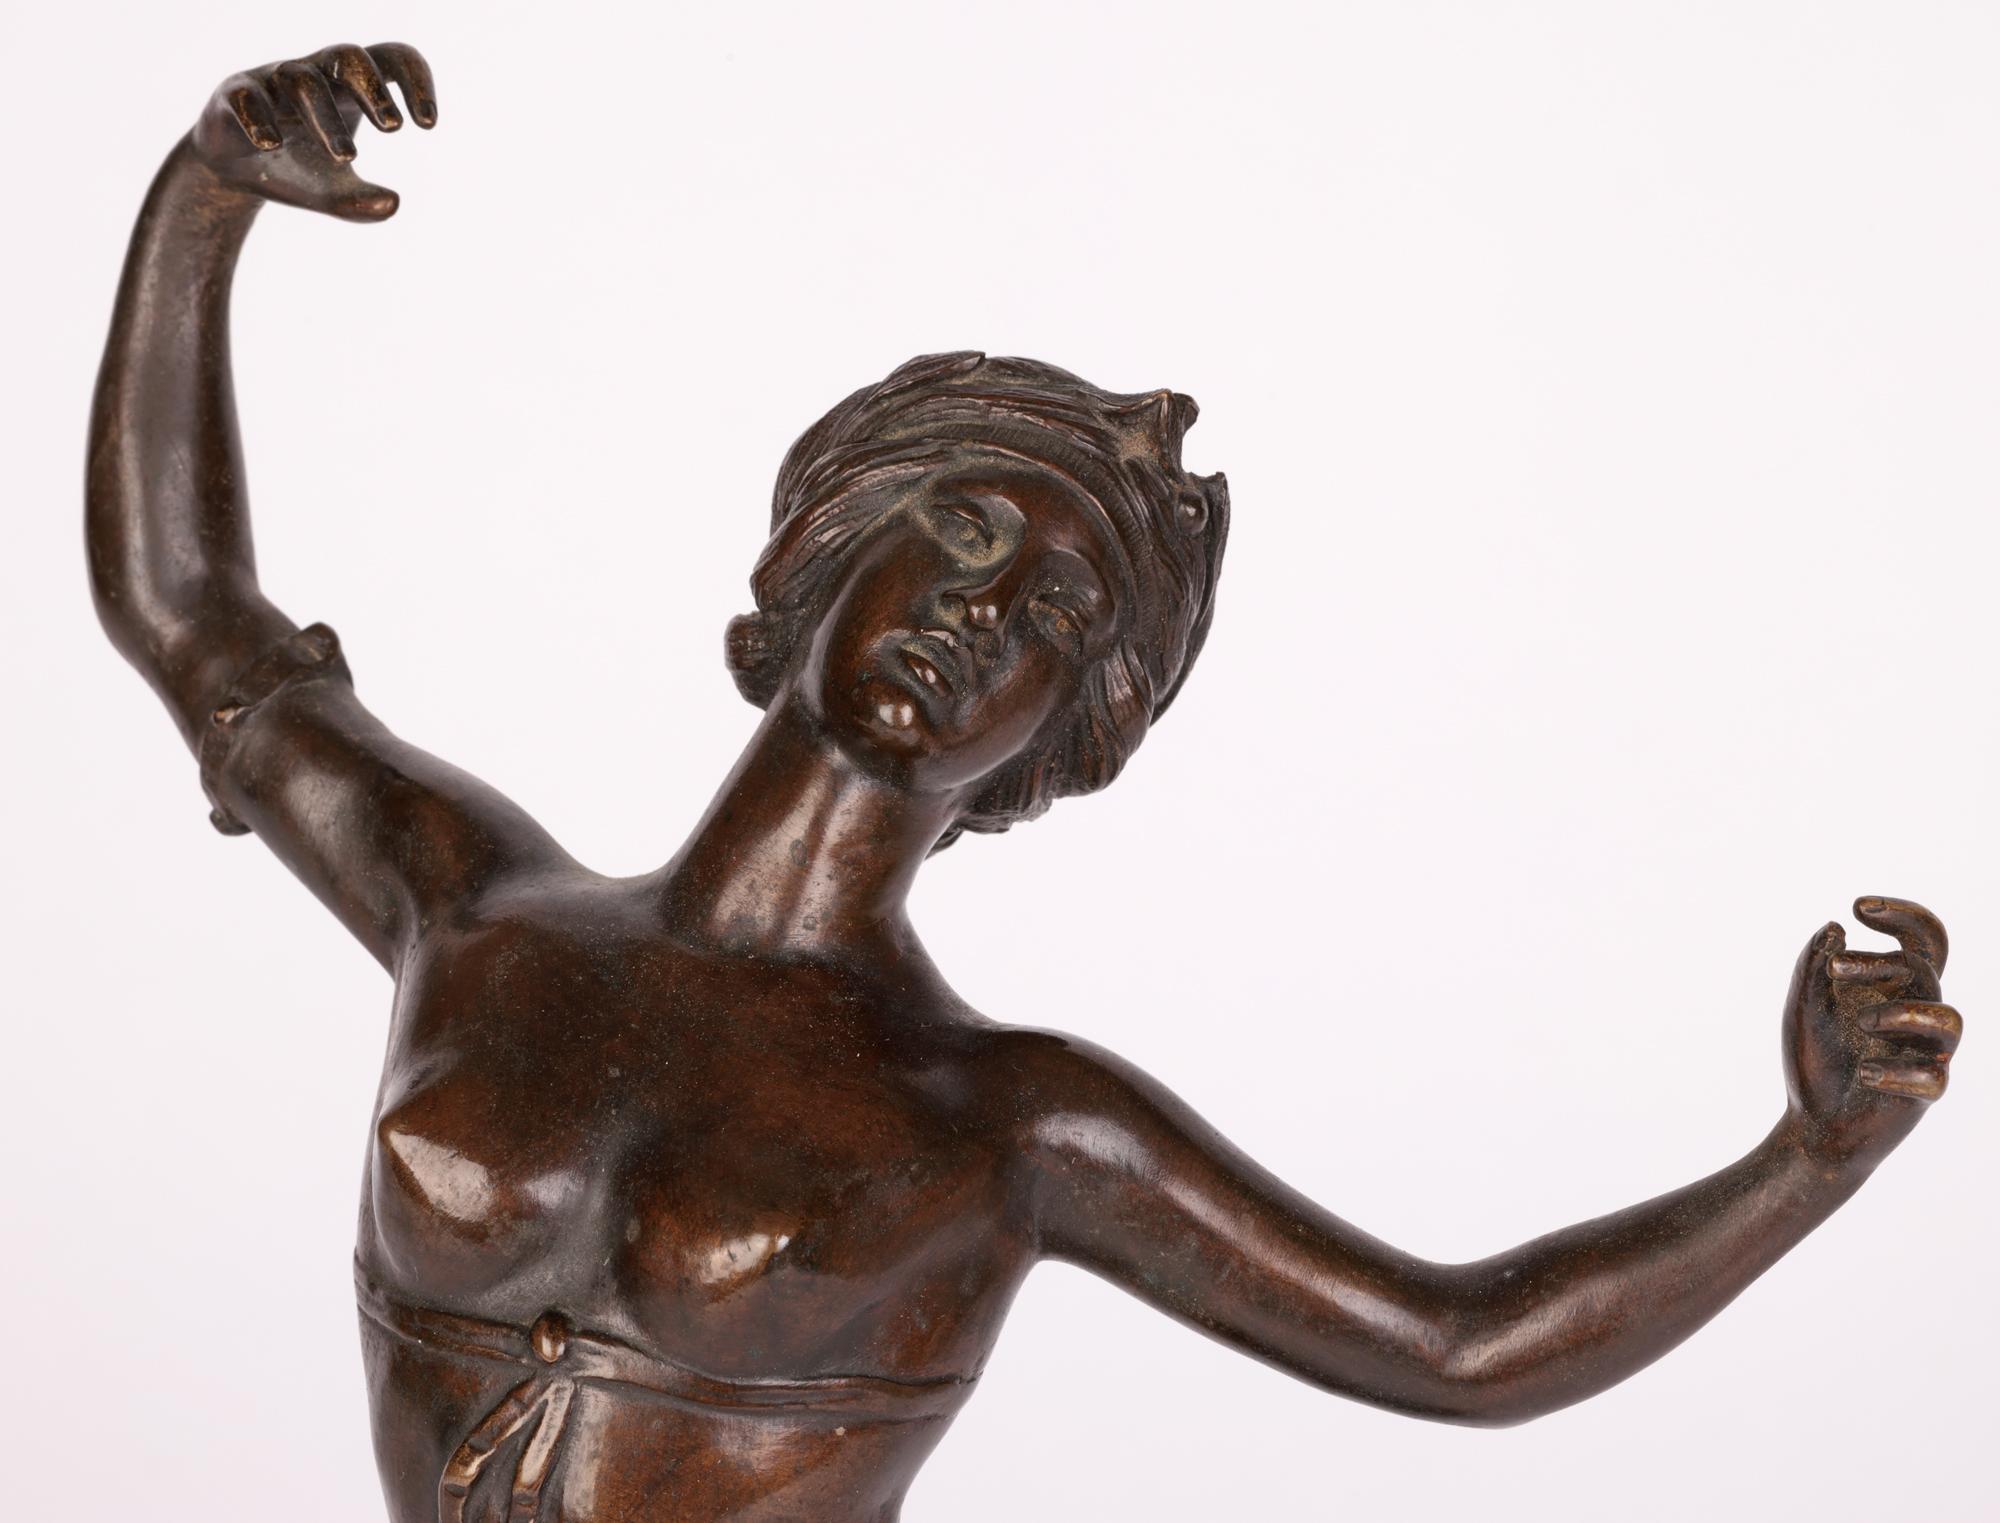 A wonderful Austrian bronze sculpture titled ‘Tanzender Weiblicher Akt’ and portraying a dancing female nude by renowned Vienna born sculptor Theodor Friedl (Austrian, 1842-1900). The sculpture portrays a woman wearing a wreath in her hair and a